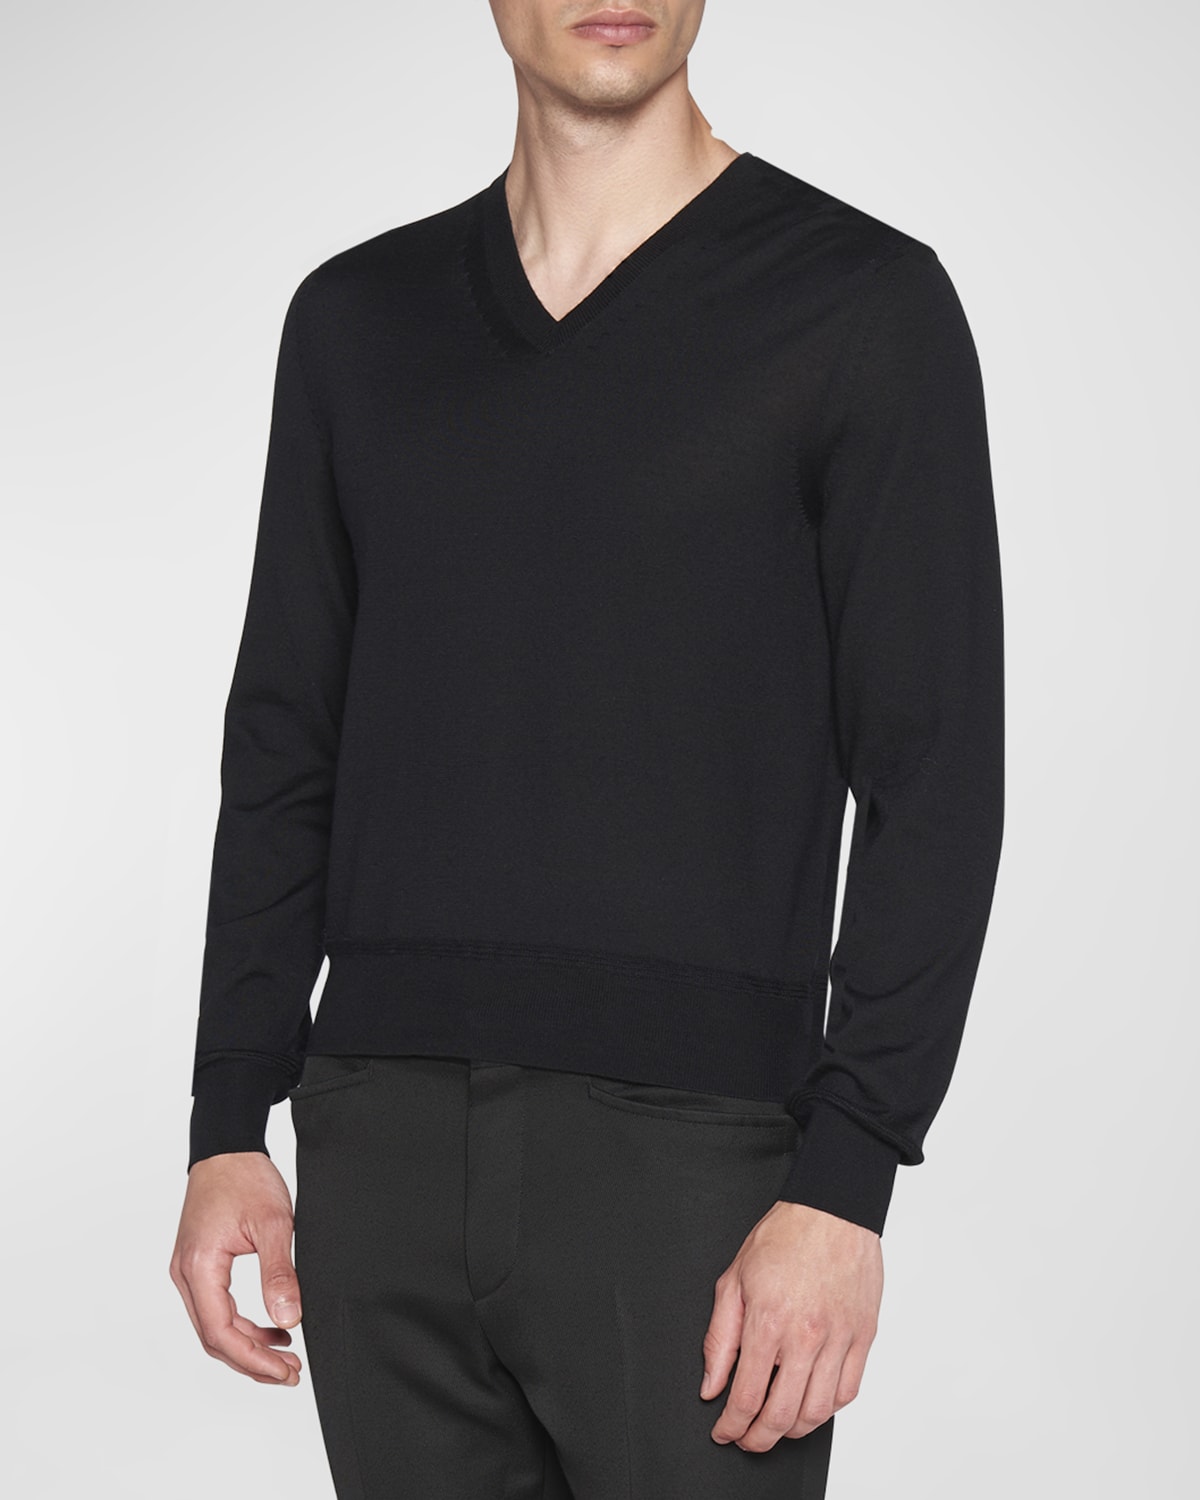 TOM FORD Men's Double-Face Silk V-Neck Sweater | Neiman Marcus